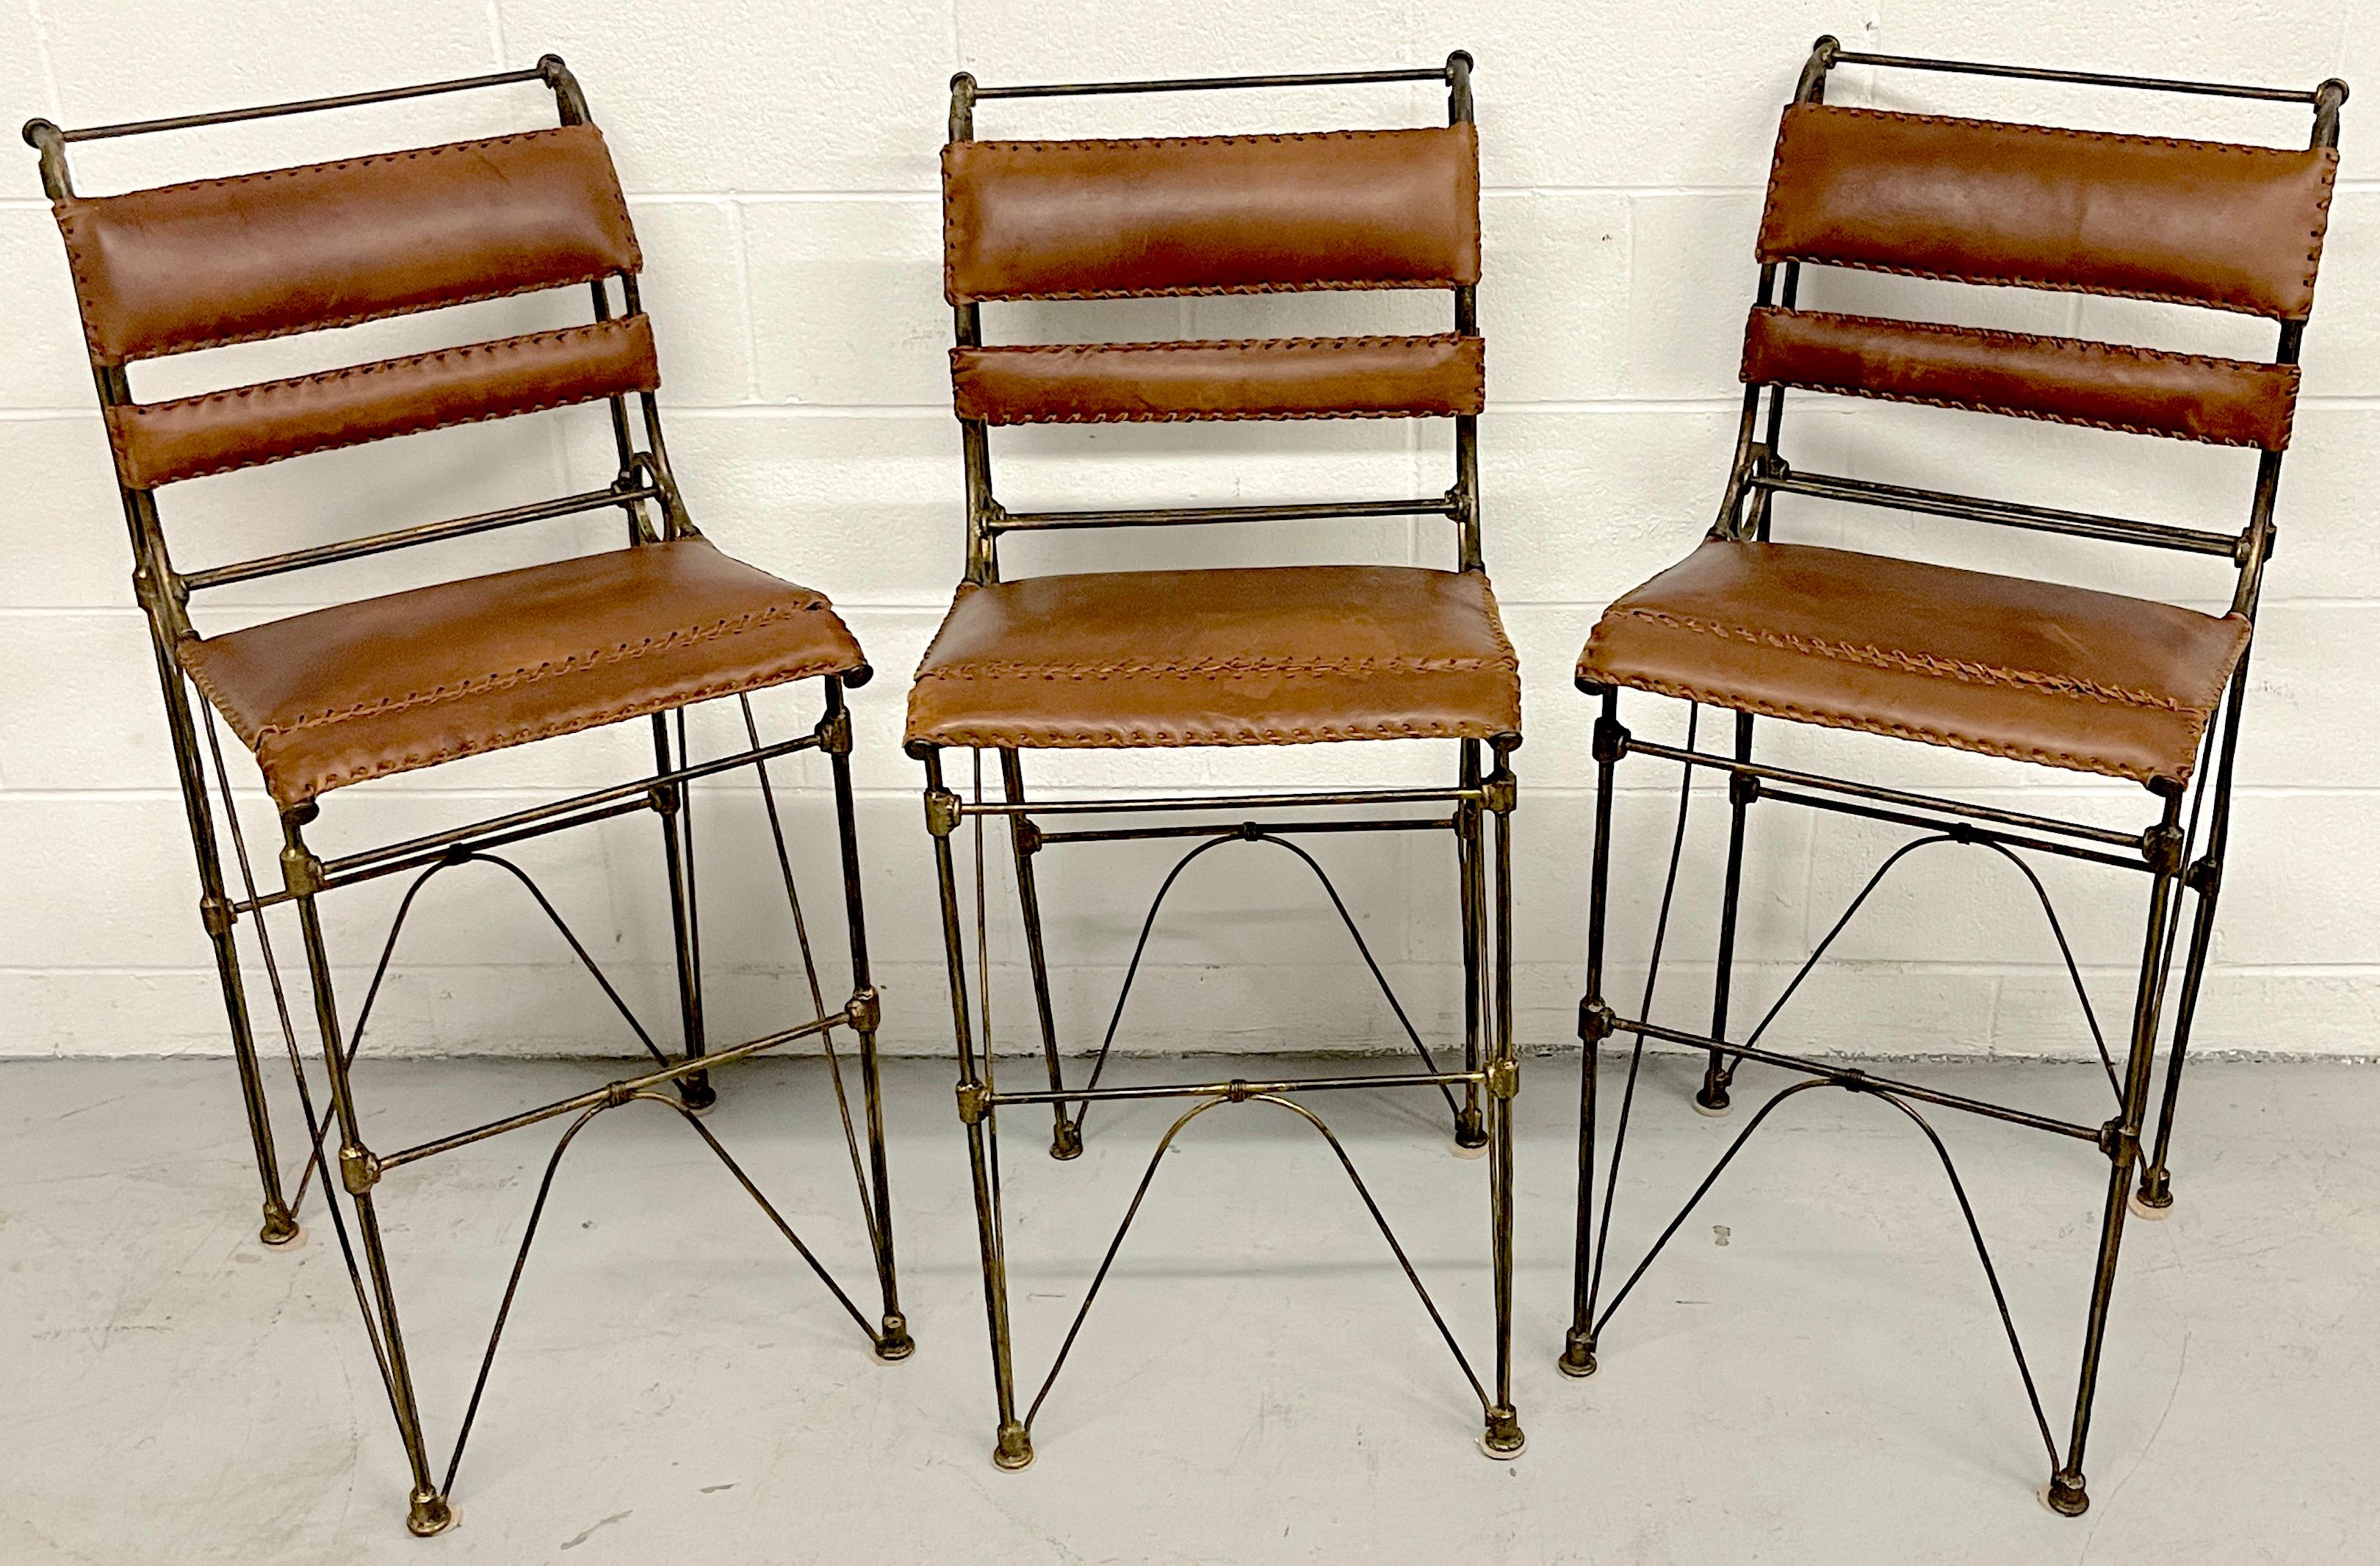 Set of three modern iron & stitched leather barstools.
USA, later 20th century.
A stunning set of three sculptural wrought iron bar stools with stitched Saddle leather backrests and seats. The design of the barstools show influences of famed